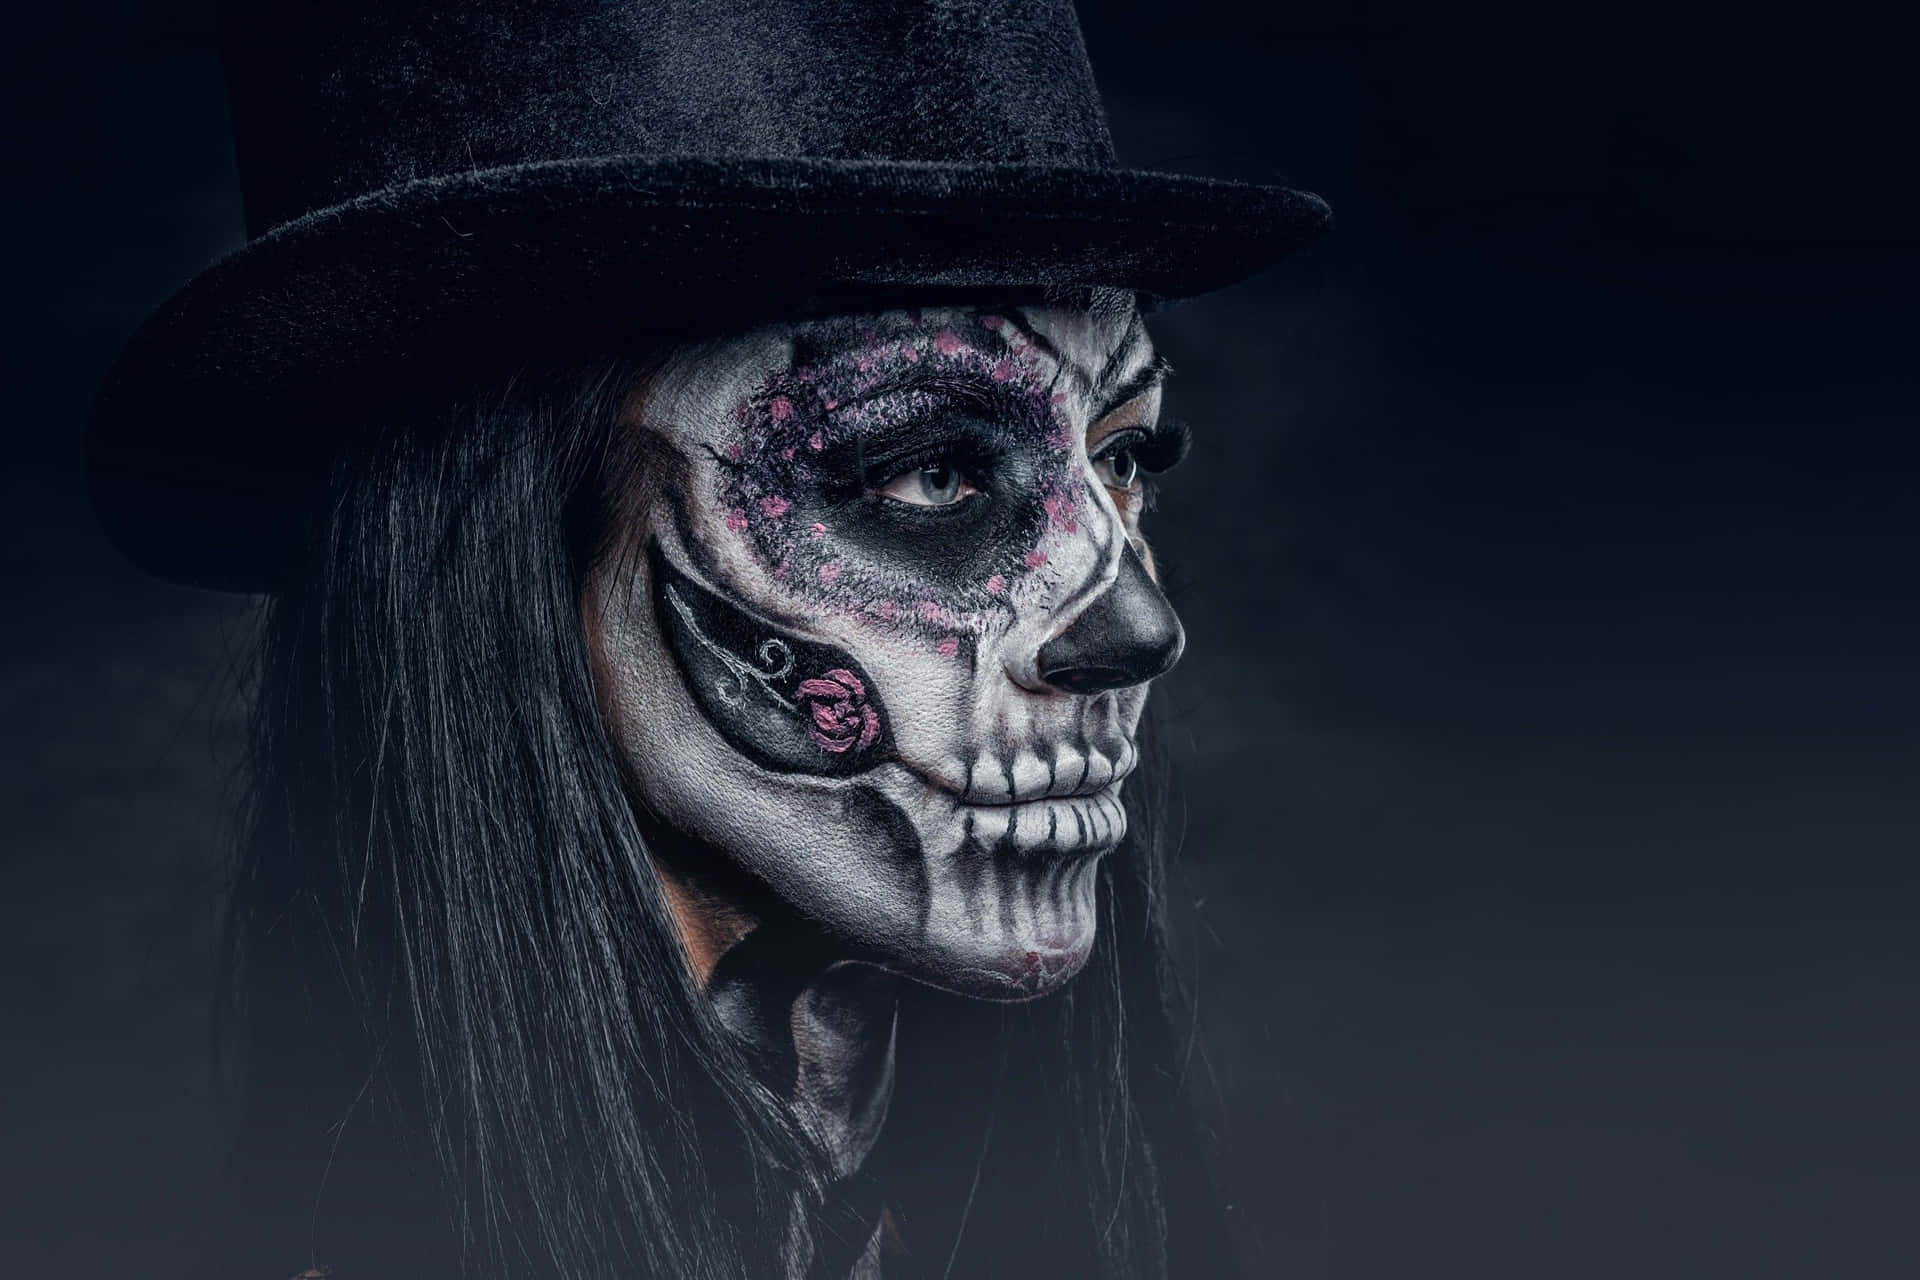 Celebrating life and remembering lost loved ones with a festive Day of the Dead celebration